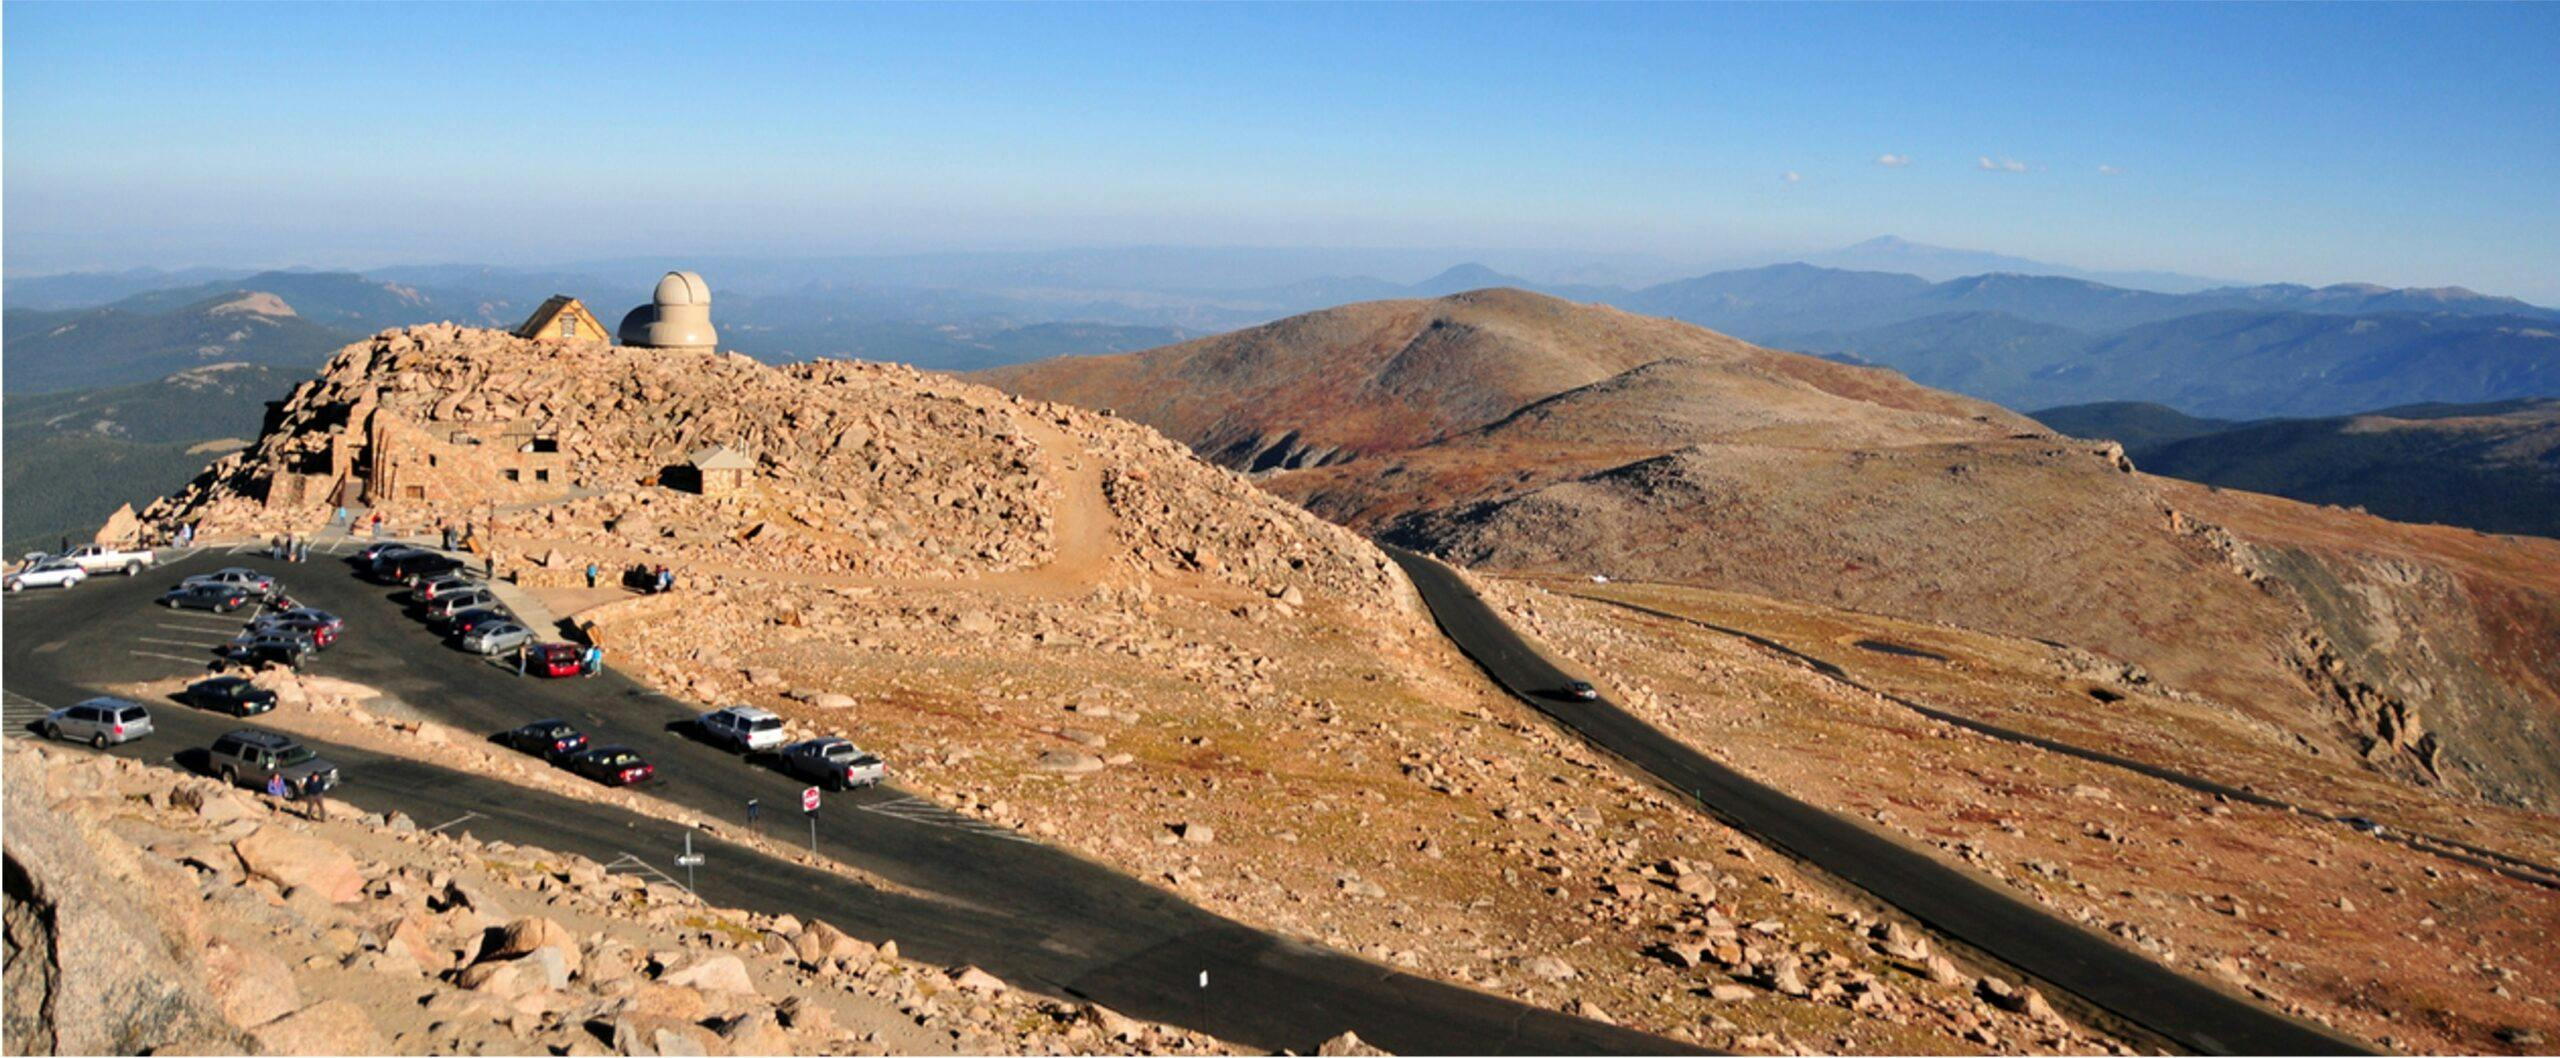 The majestic Mount Evans Scenic Byway